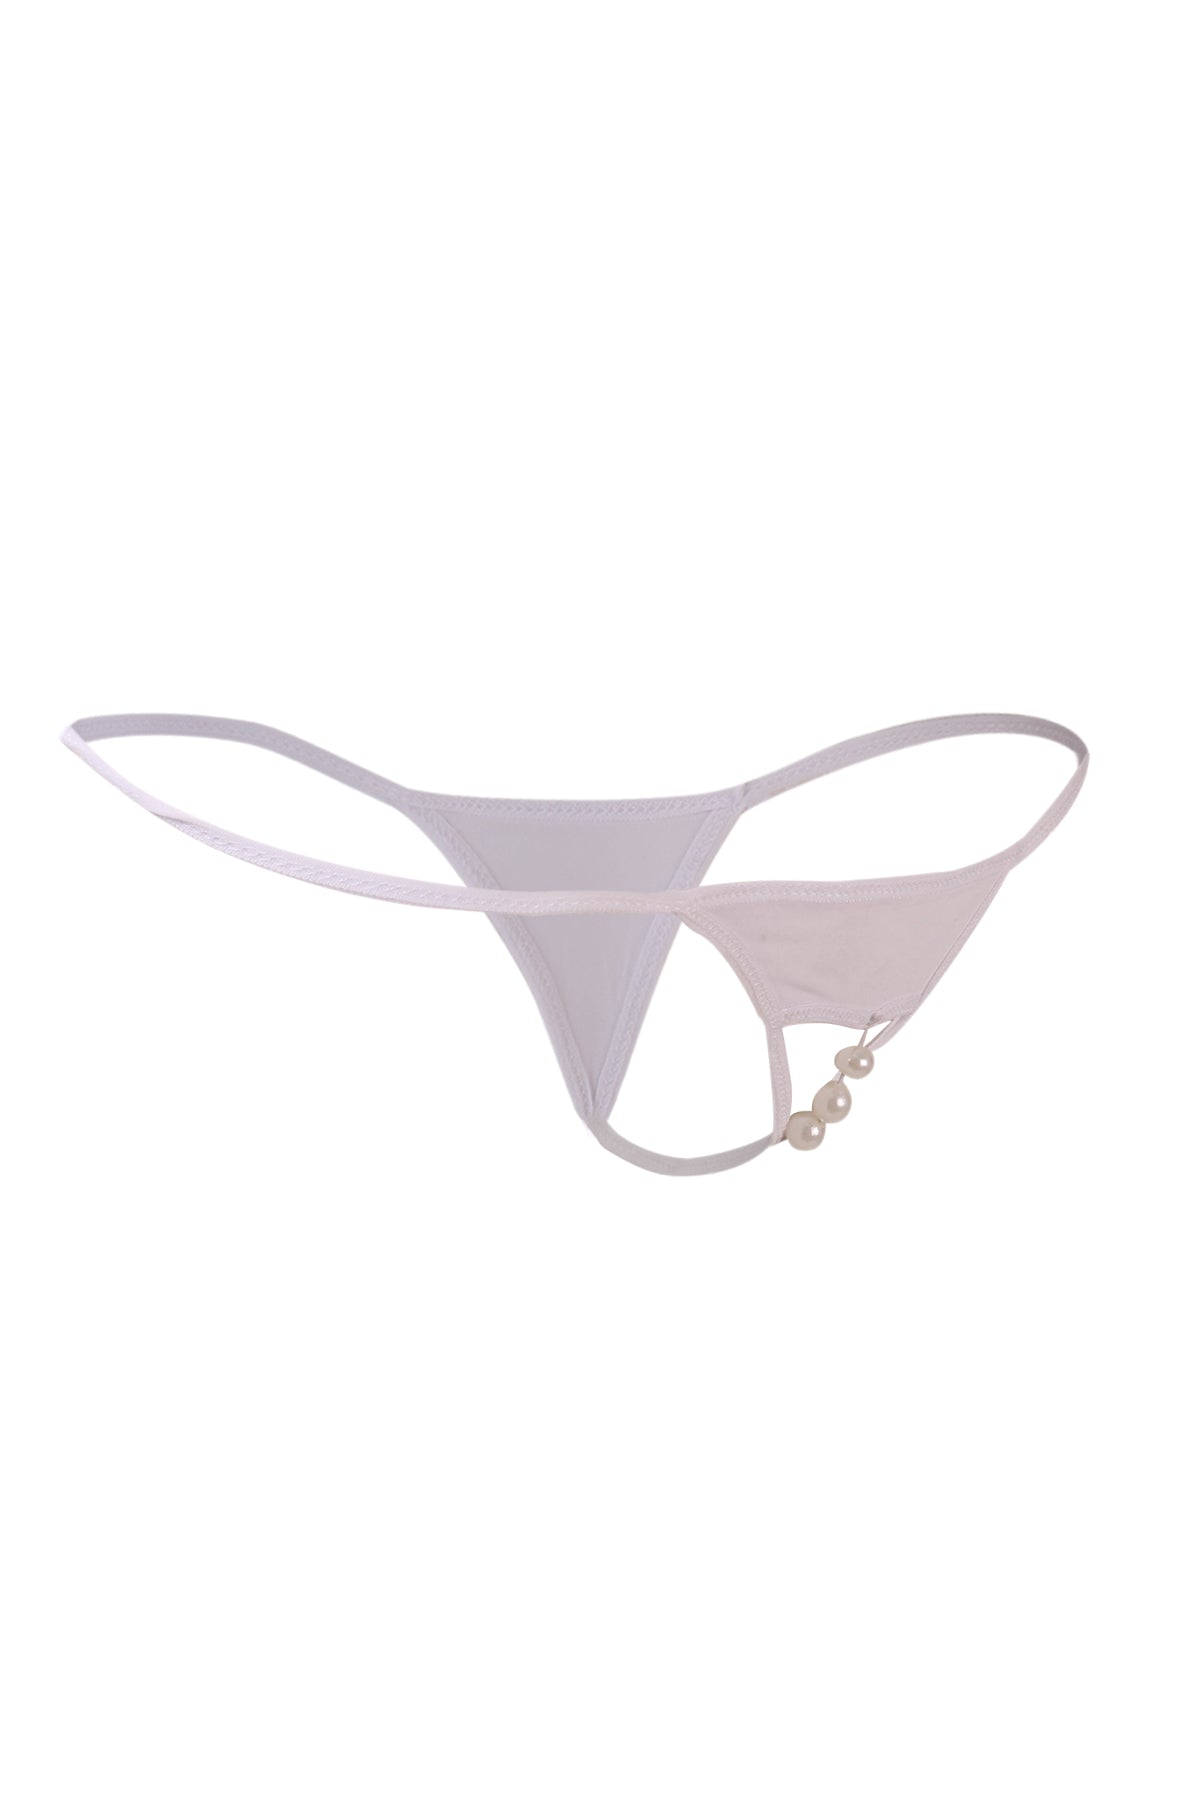 Shop ItspleaZure Womens Sexy Open Crotch Pearl Thong at Best Price